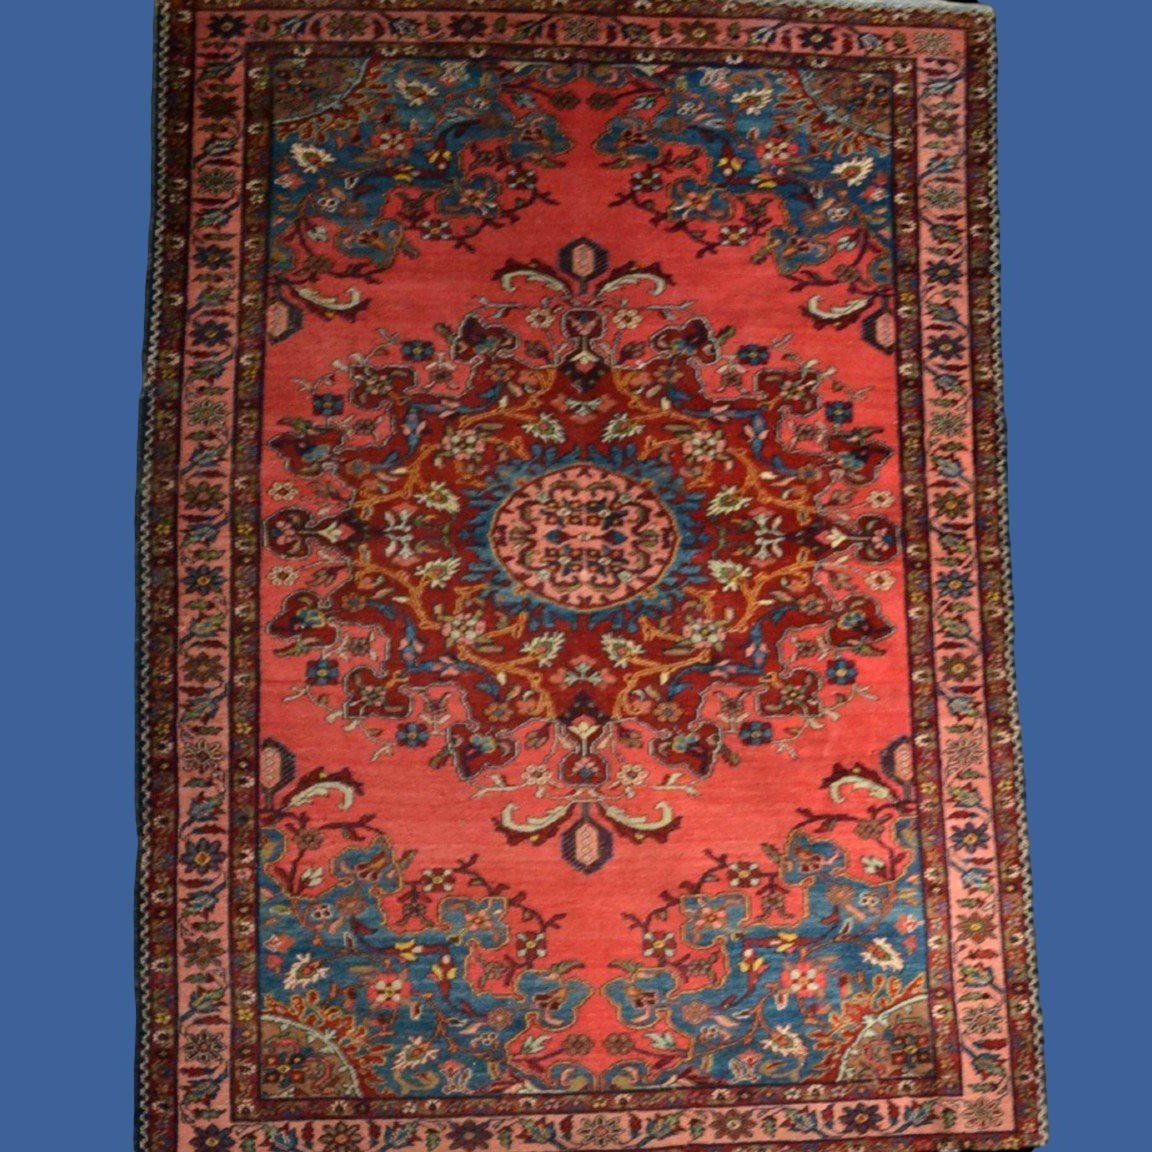 Old Tafresh Rug, 134 X 205 Cm, Hand-knotted Wool In Iran, First Part Of The 20th Century-photo-7